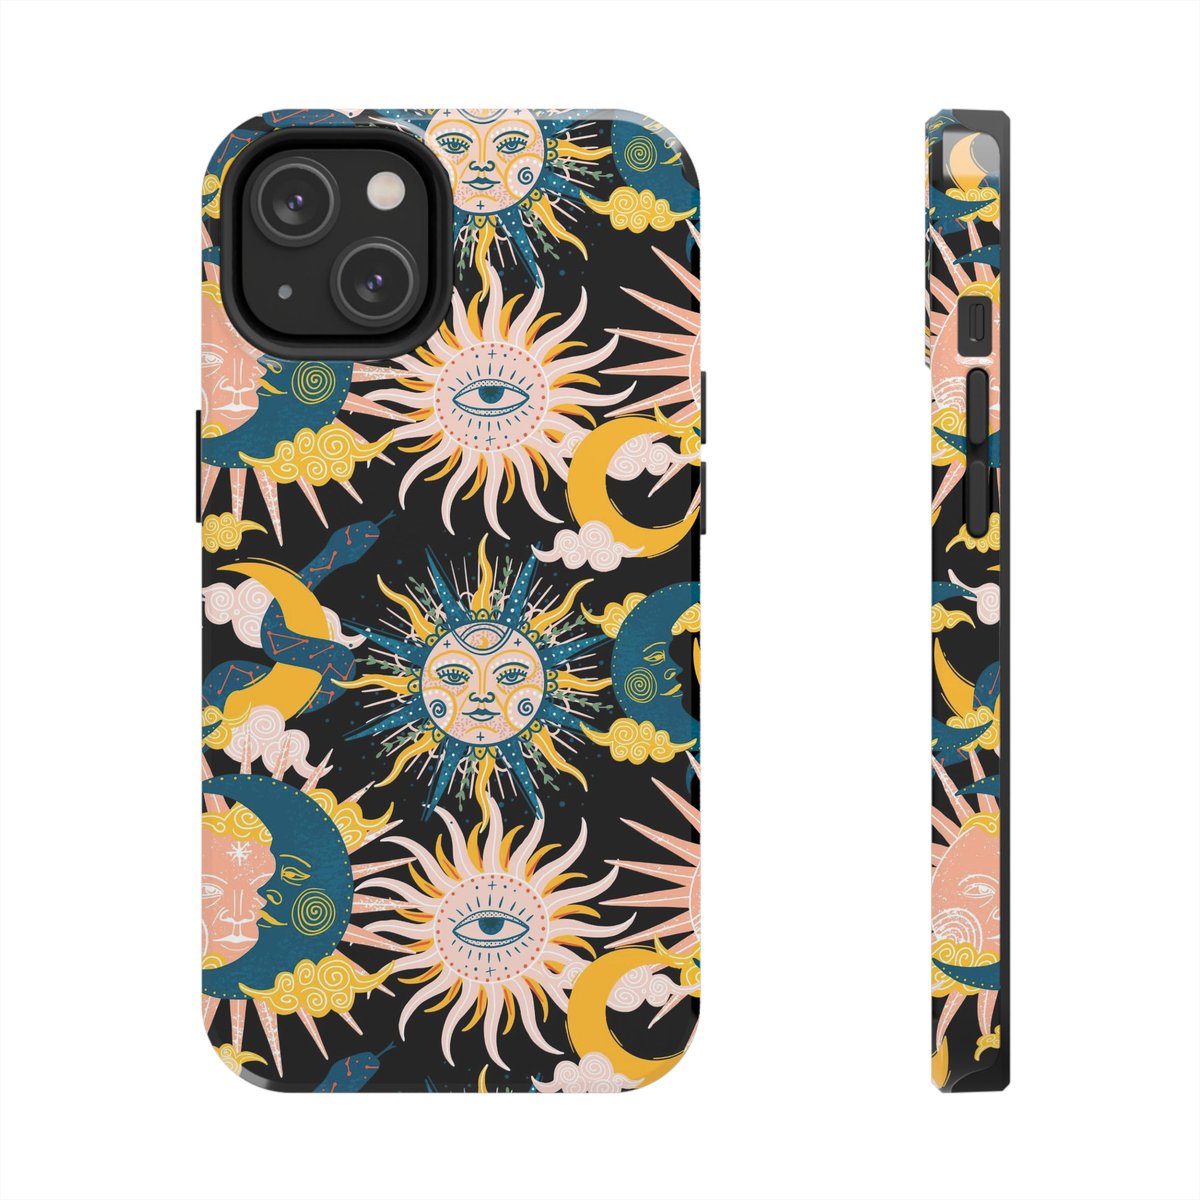 Excited to share the latest addition to my #etsy shop: Harmony in the Cosmos: Sun and Moon Celestial Phone Case etsy.me/3NytZOE #celestialcase #sunmoon #cosmicvibe #phonecase #astraldesign #lunarstyle #iPhone #harmony #protectivecase